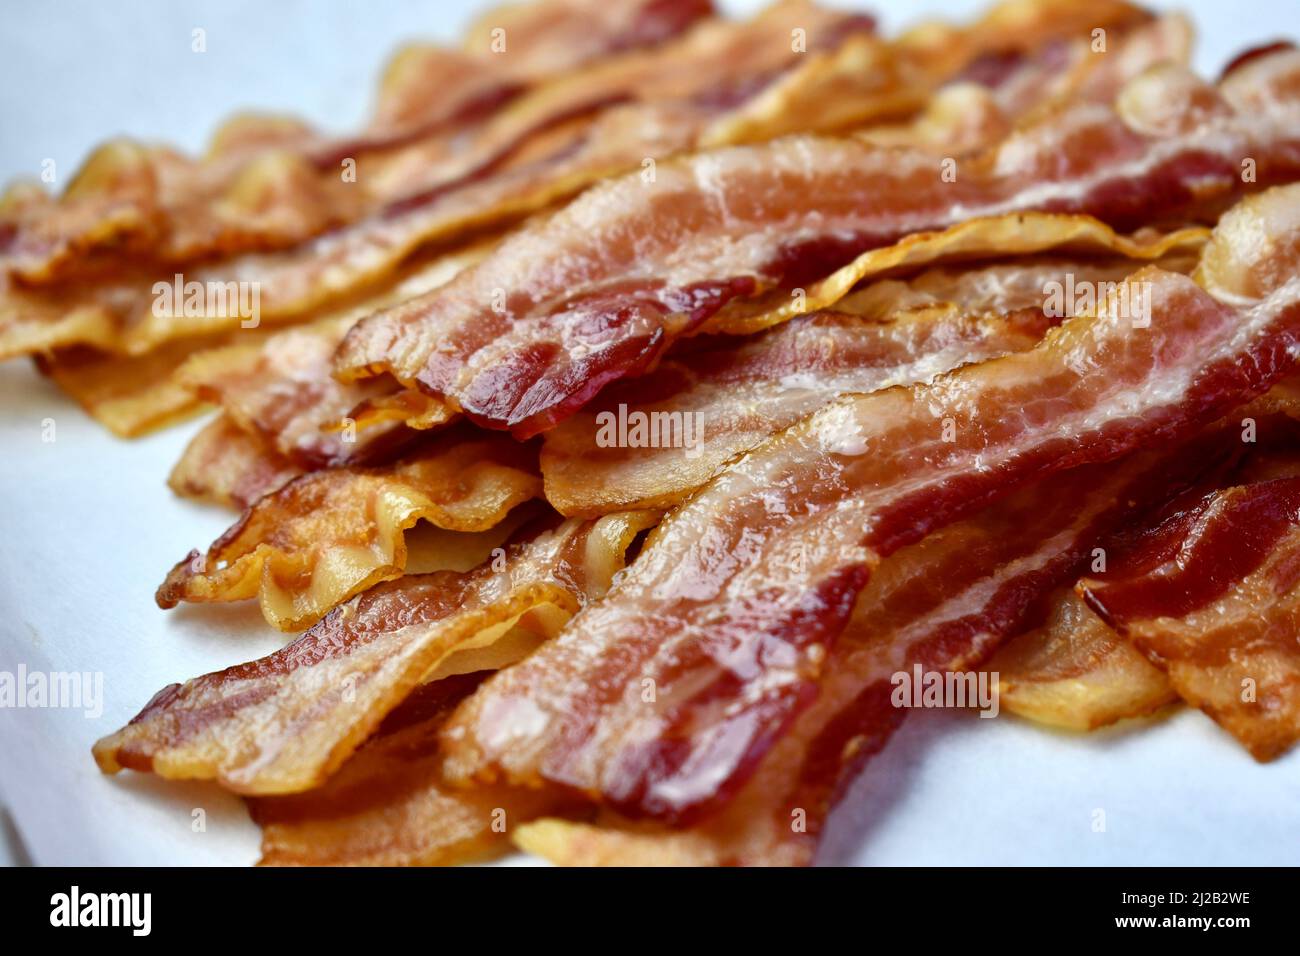 Bacon rashers on parchment lined baking pan Stock Photo